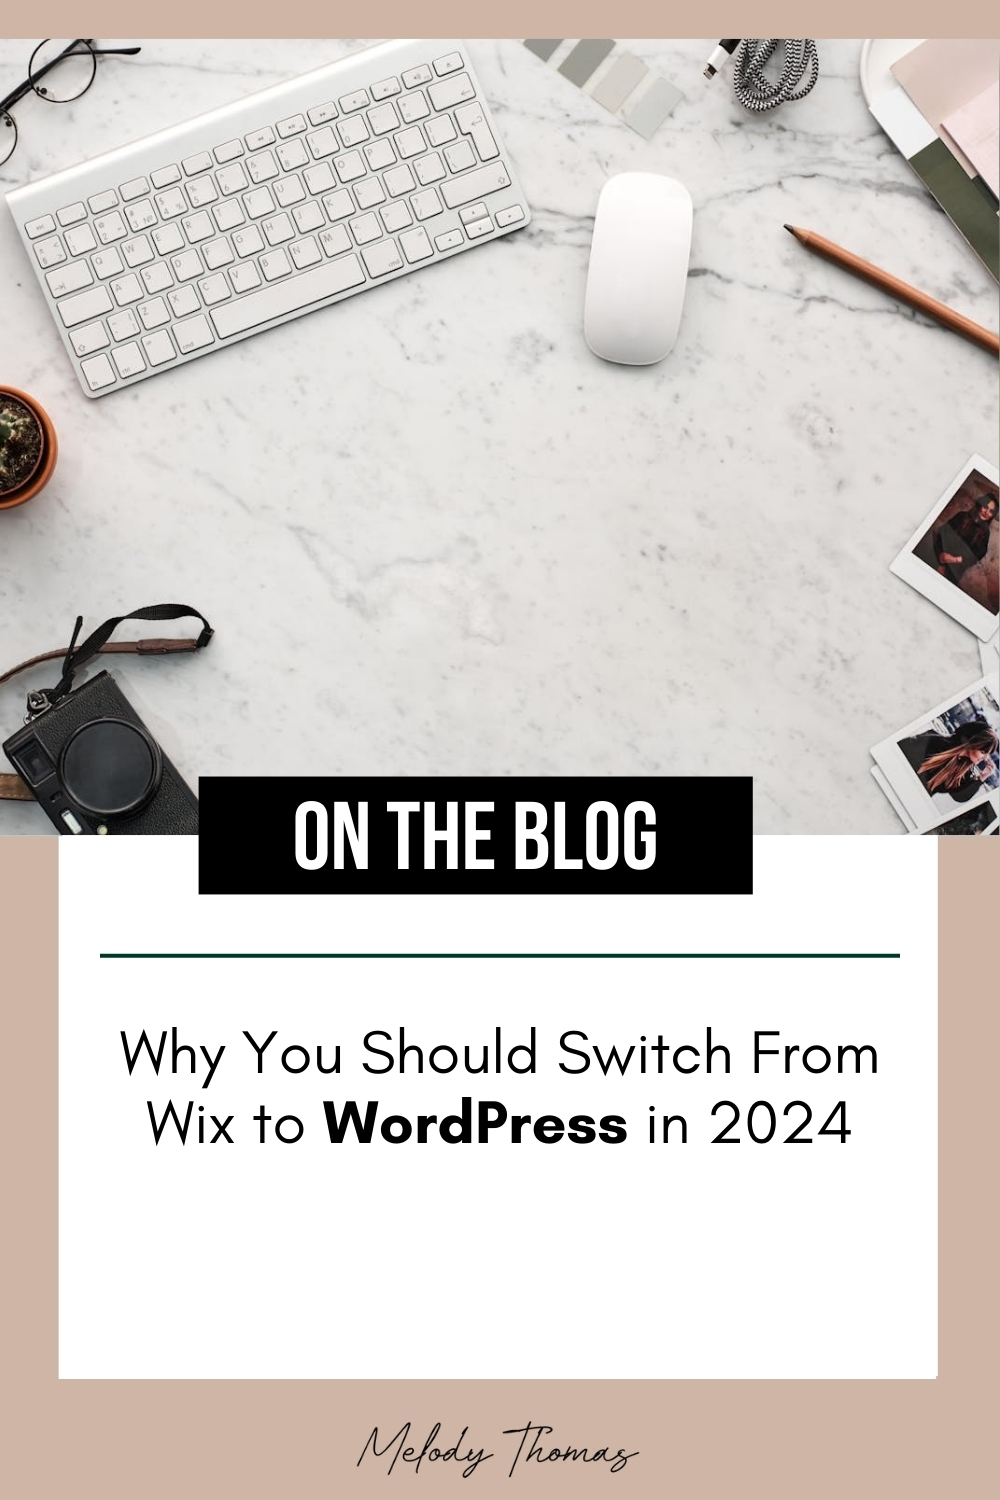 Why You Should Switch From Wix to WordPress in 2024